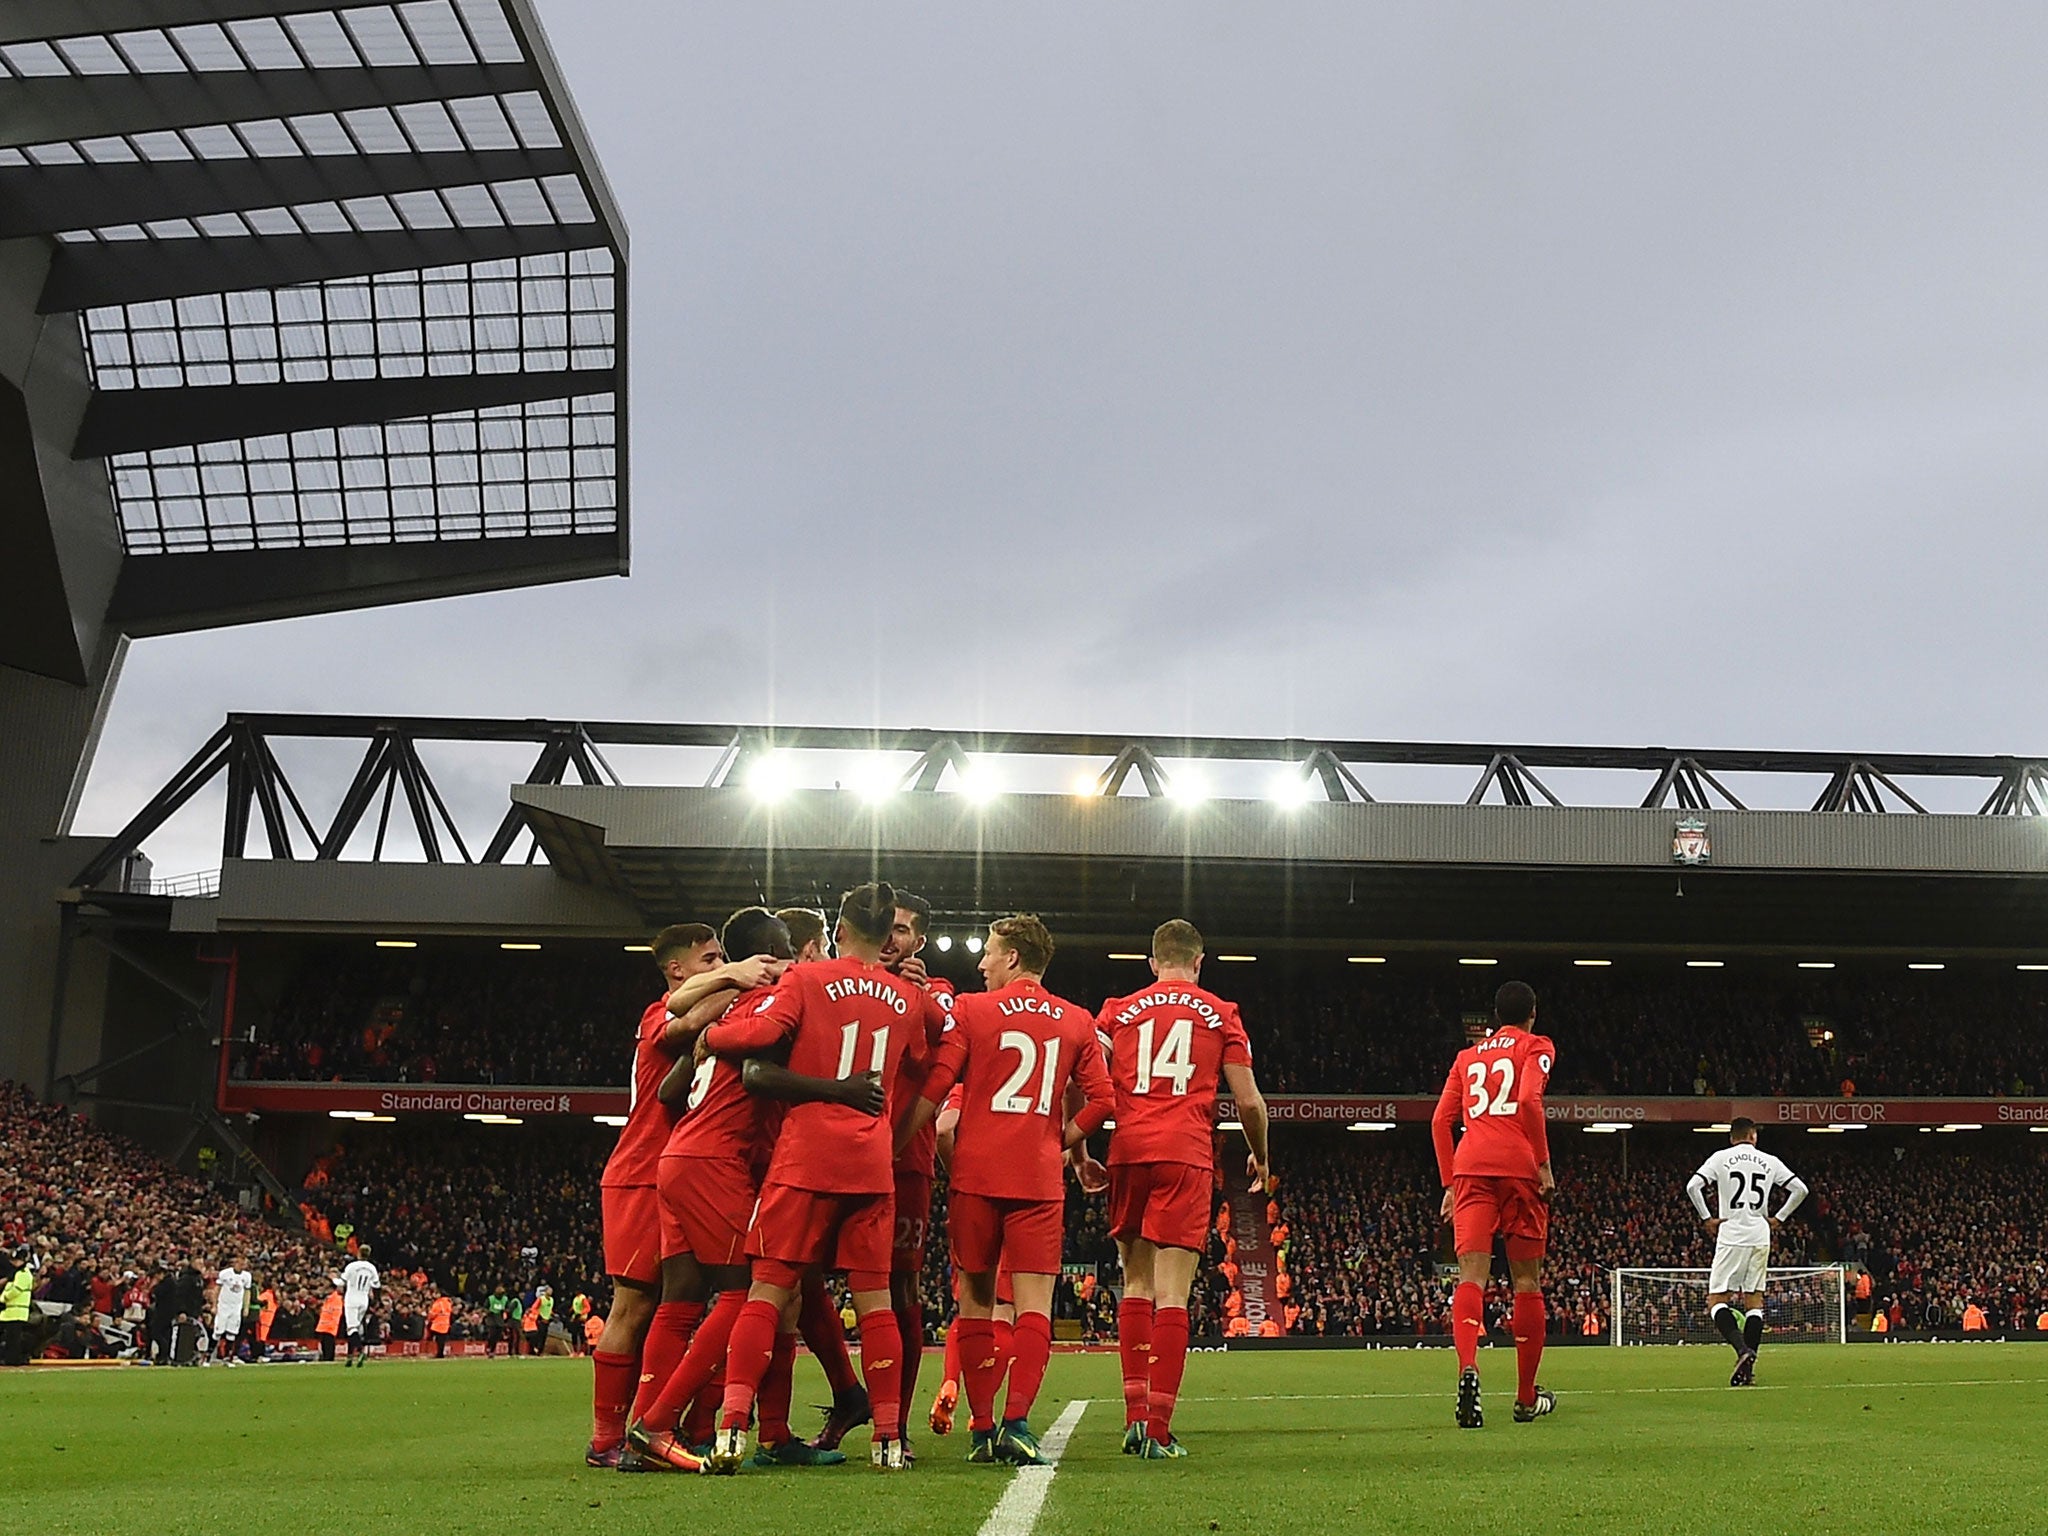 Liverpool proved to be unstoppable at Anfield as they smashed six past the visitors